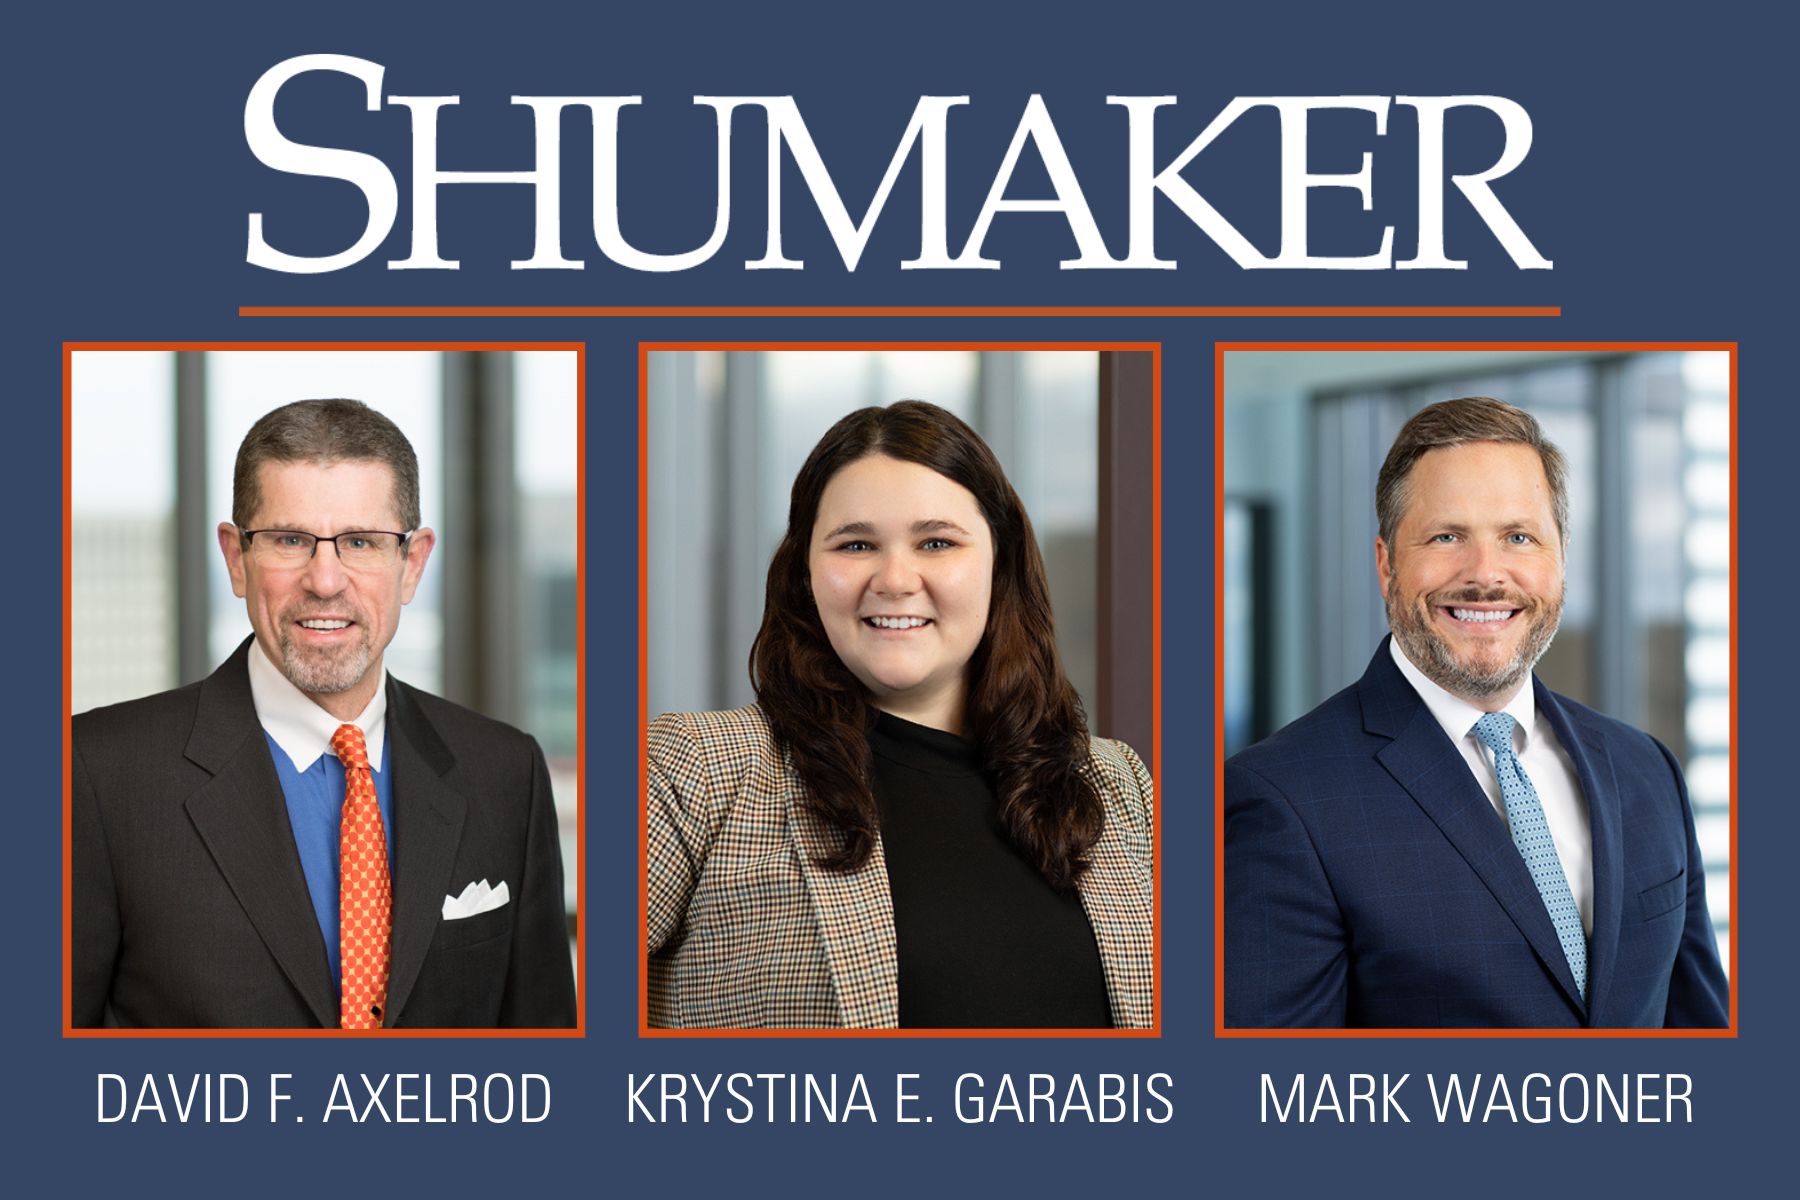 Shumaker's Legal Team Secures Acquittal in High-Stakes Bid-Rigging Case